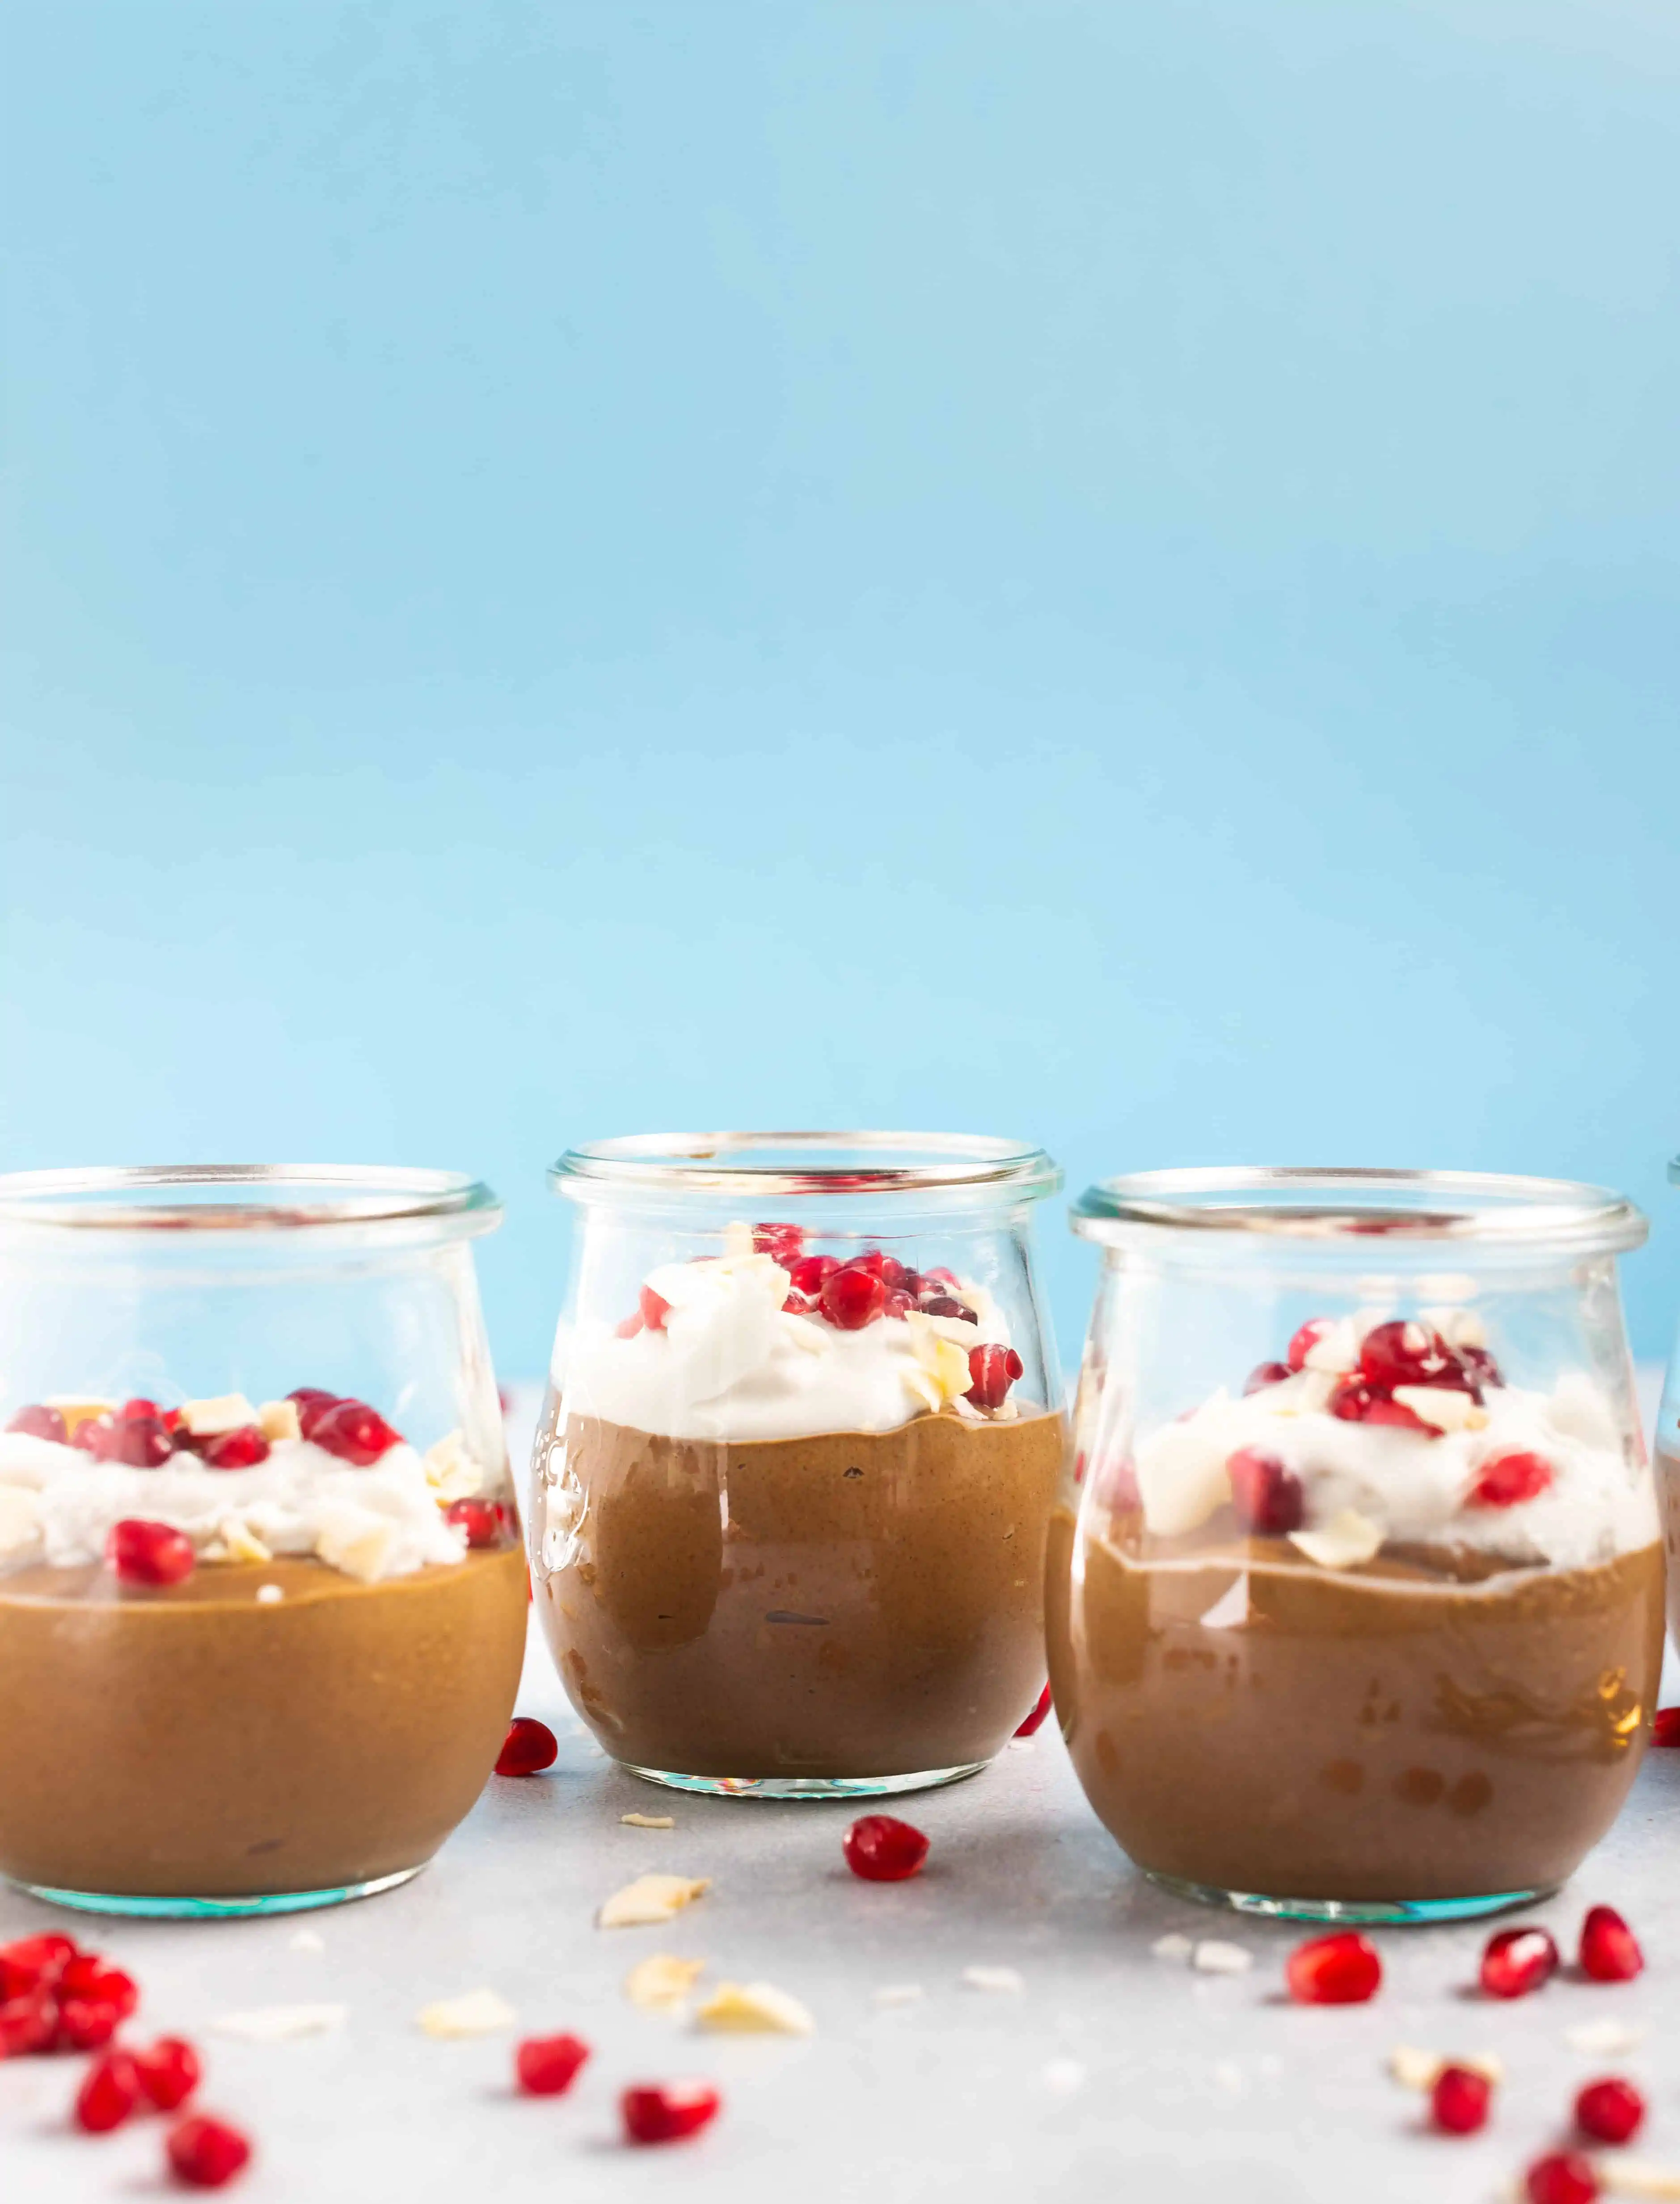 Chocolate Chia Mousse with pomegranates and coconut flakes